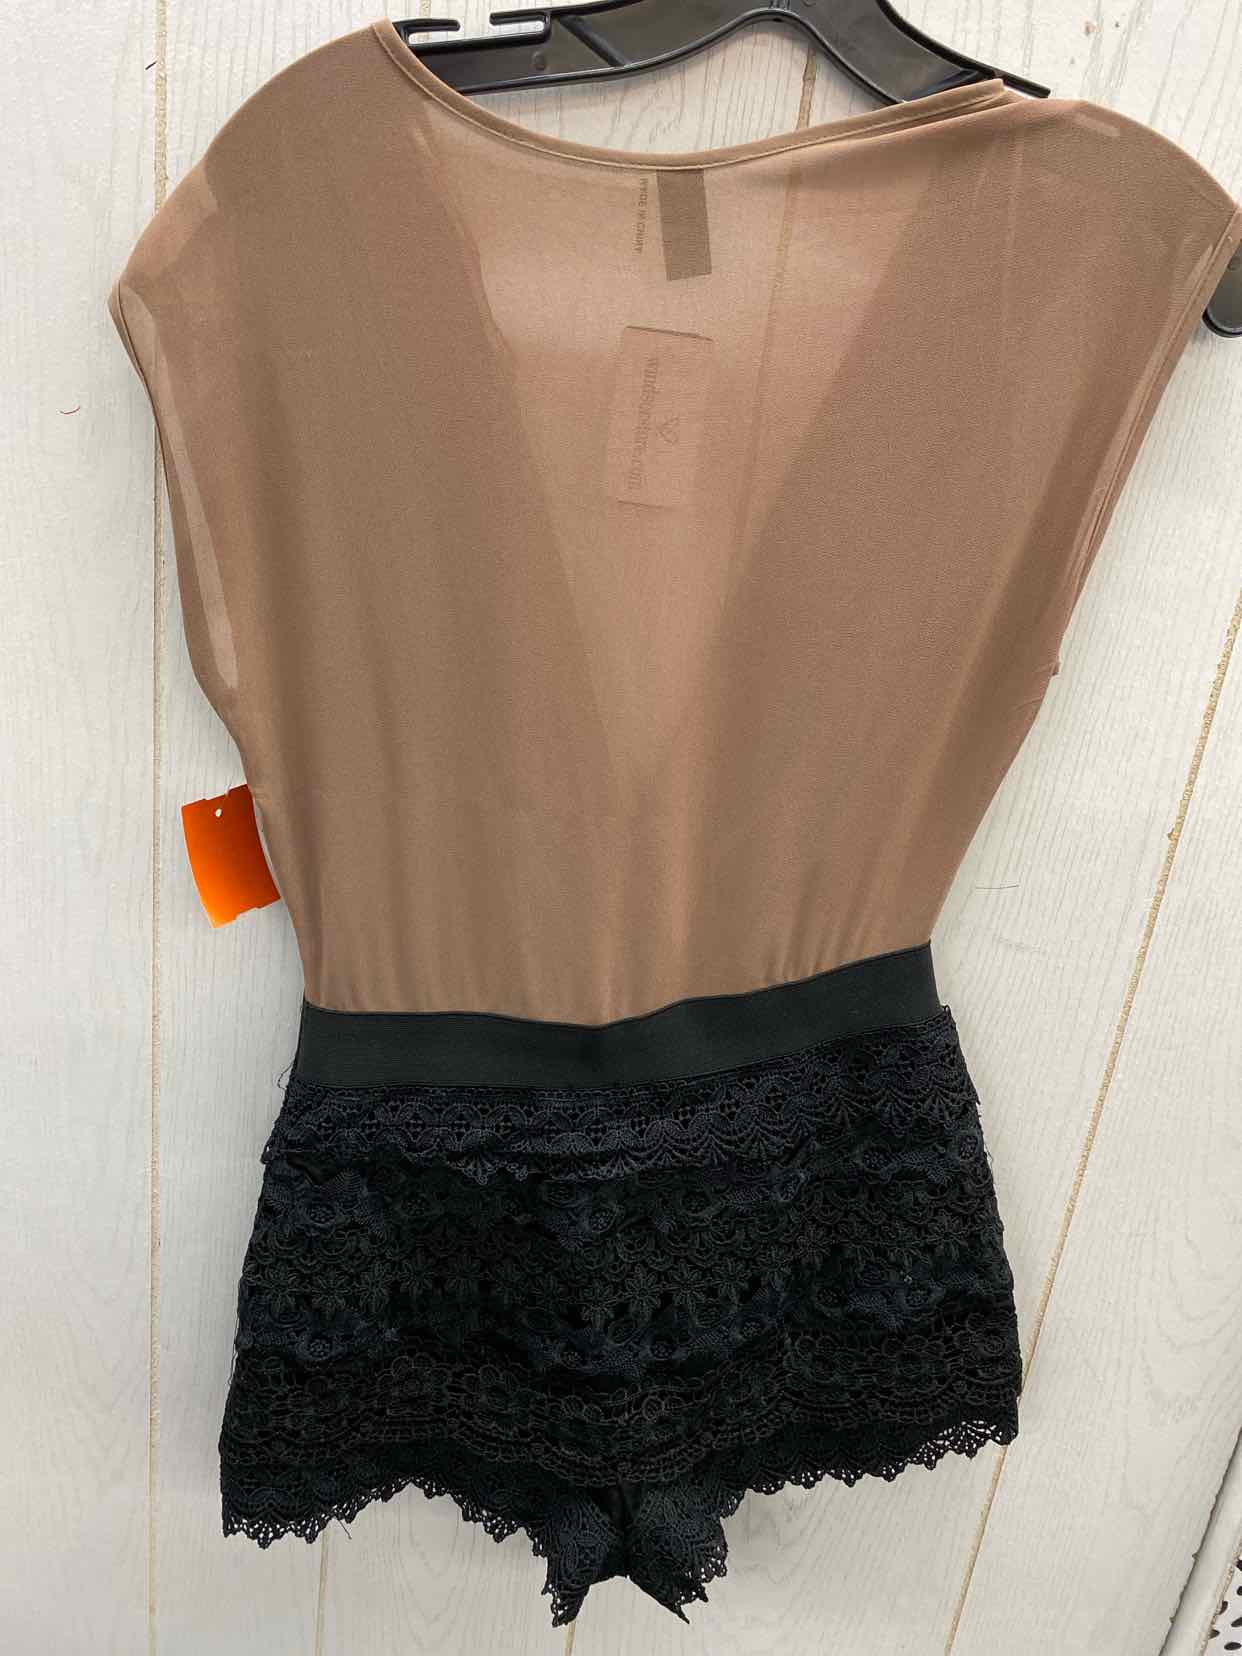 Windsor Brown Womens Size Small Romper